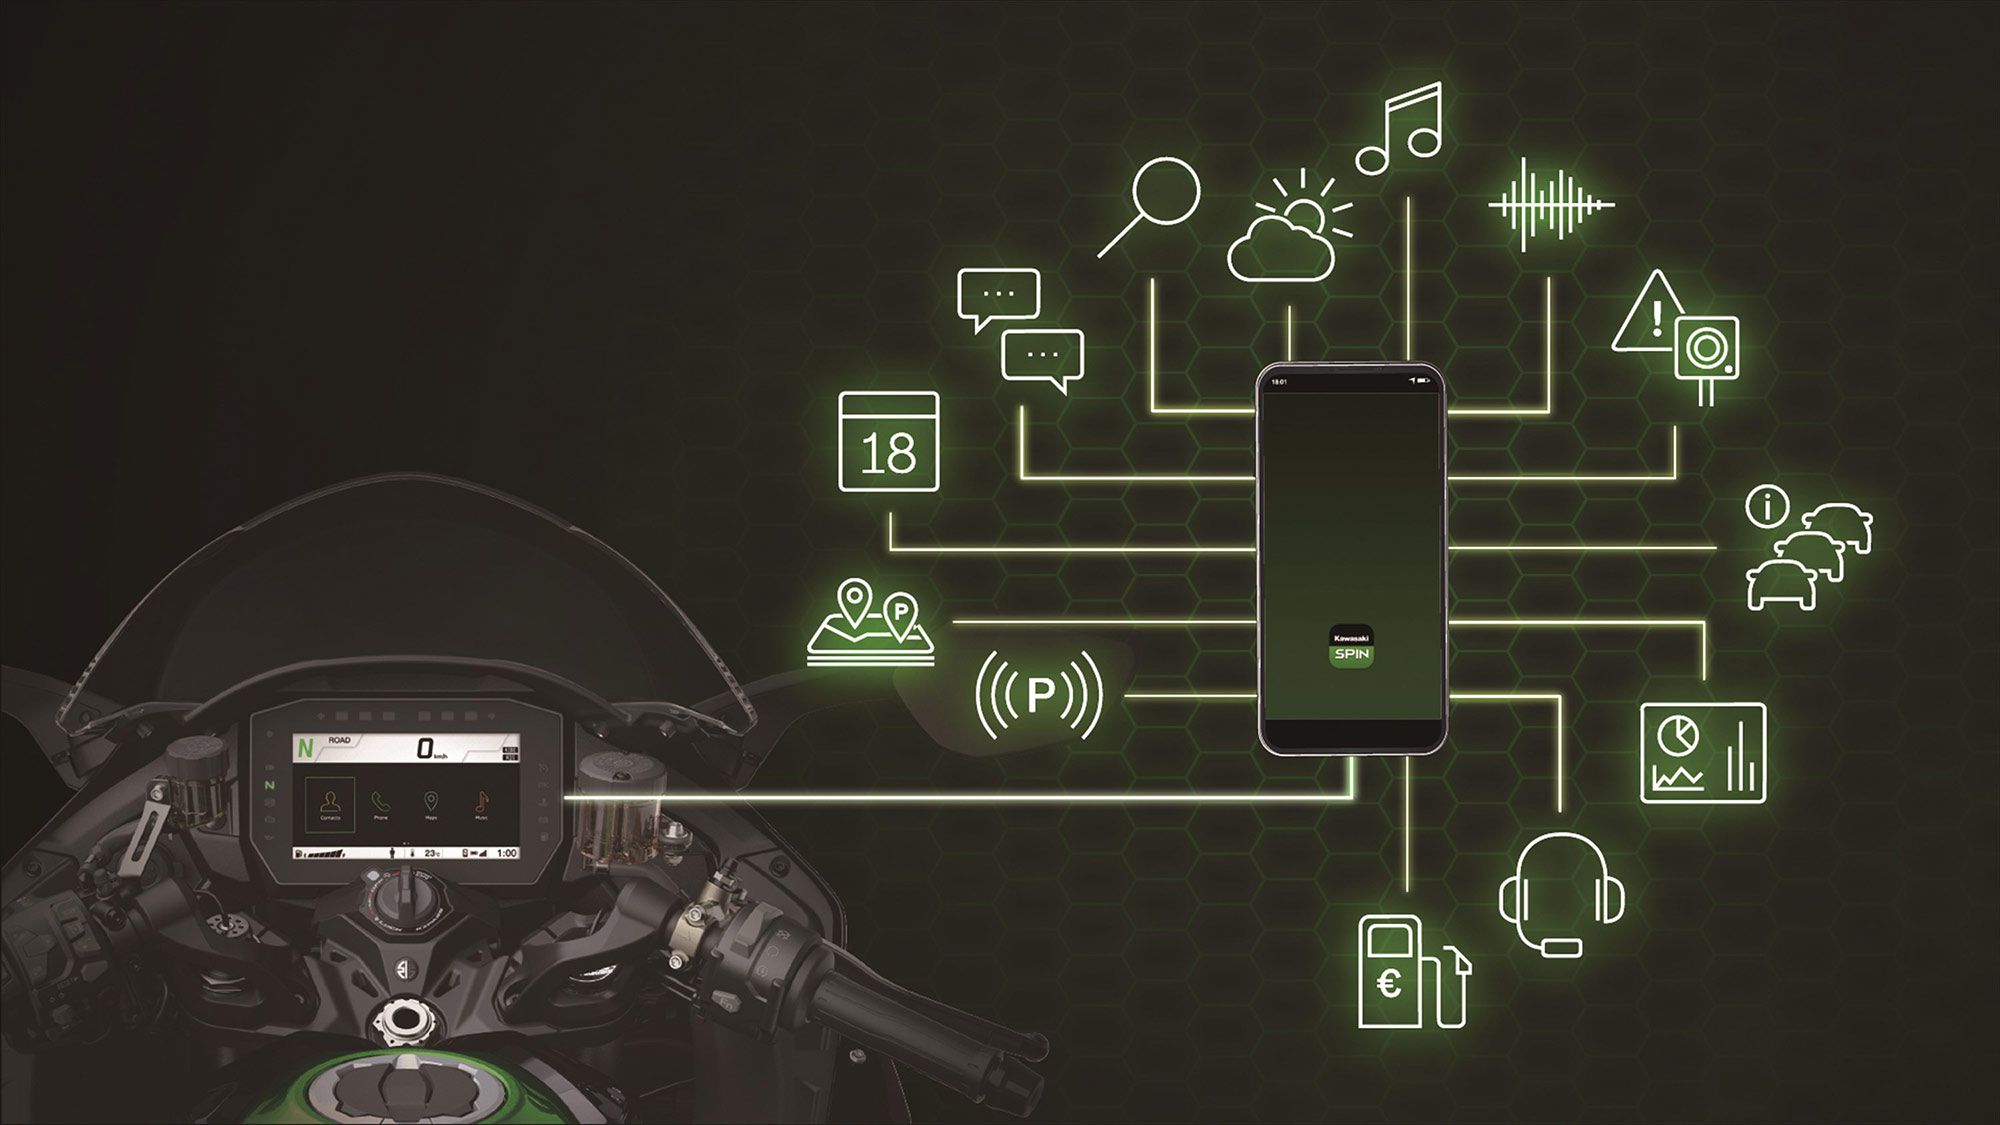 A new 6.5-inch full-color TFT instrument panel connects to Kawasaki’s Spin infotainment app.